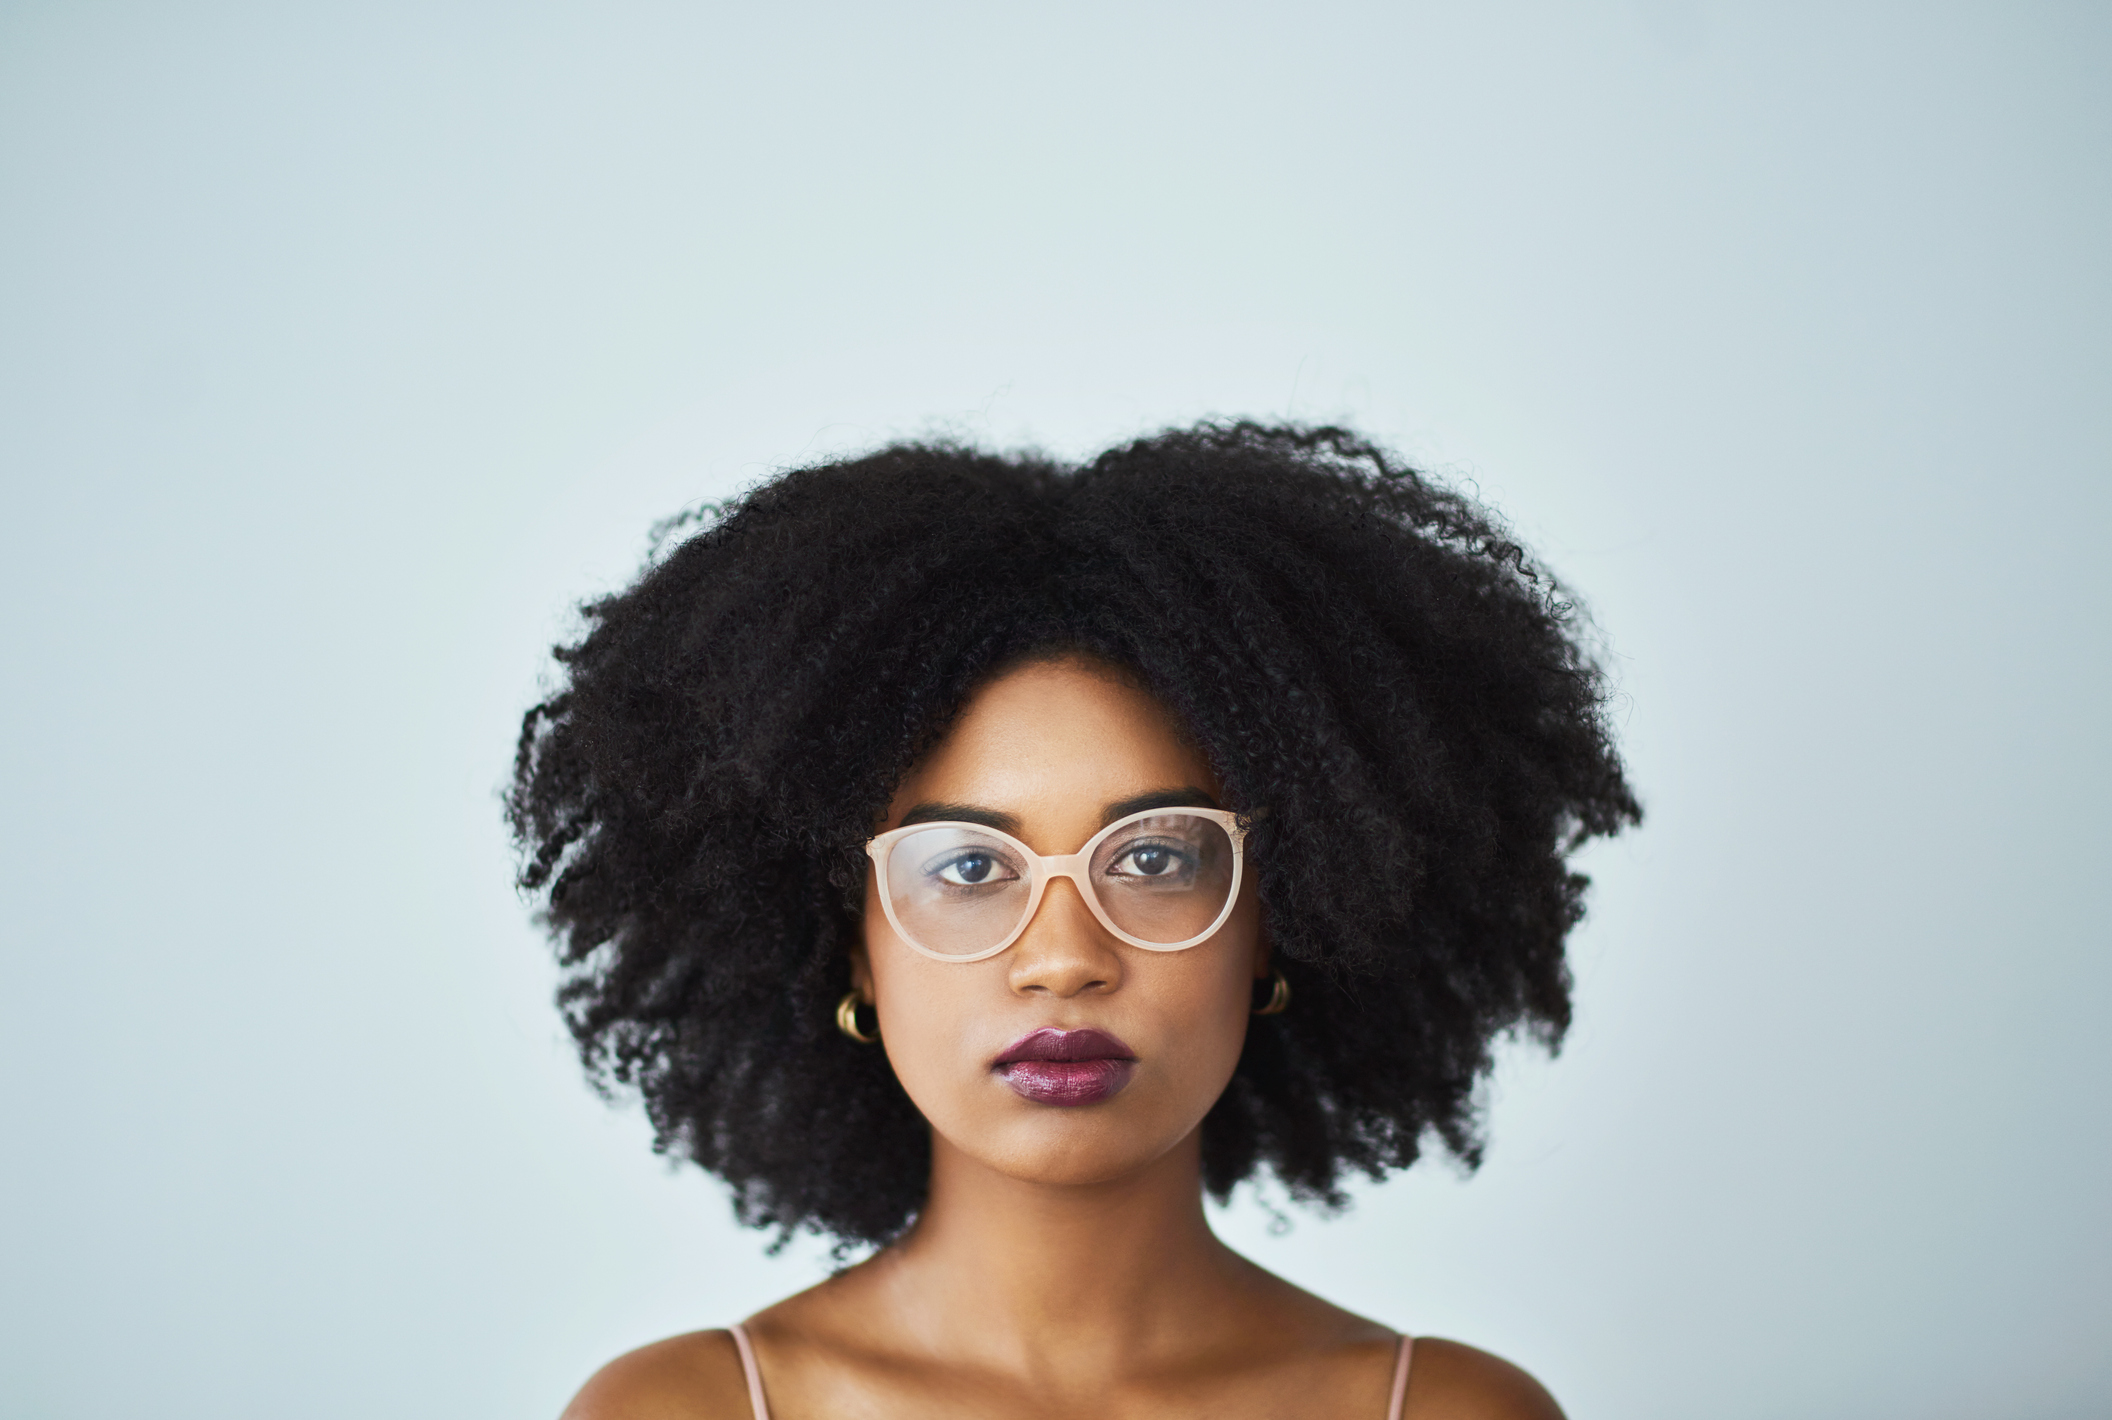 Research Reveals Black Women Wearing Natural Hairstyles Are Less Likely to Get Job Interviews